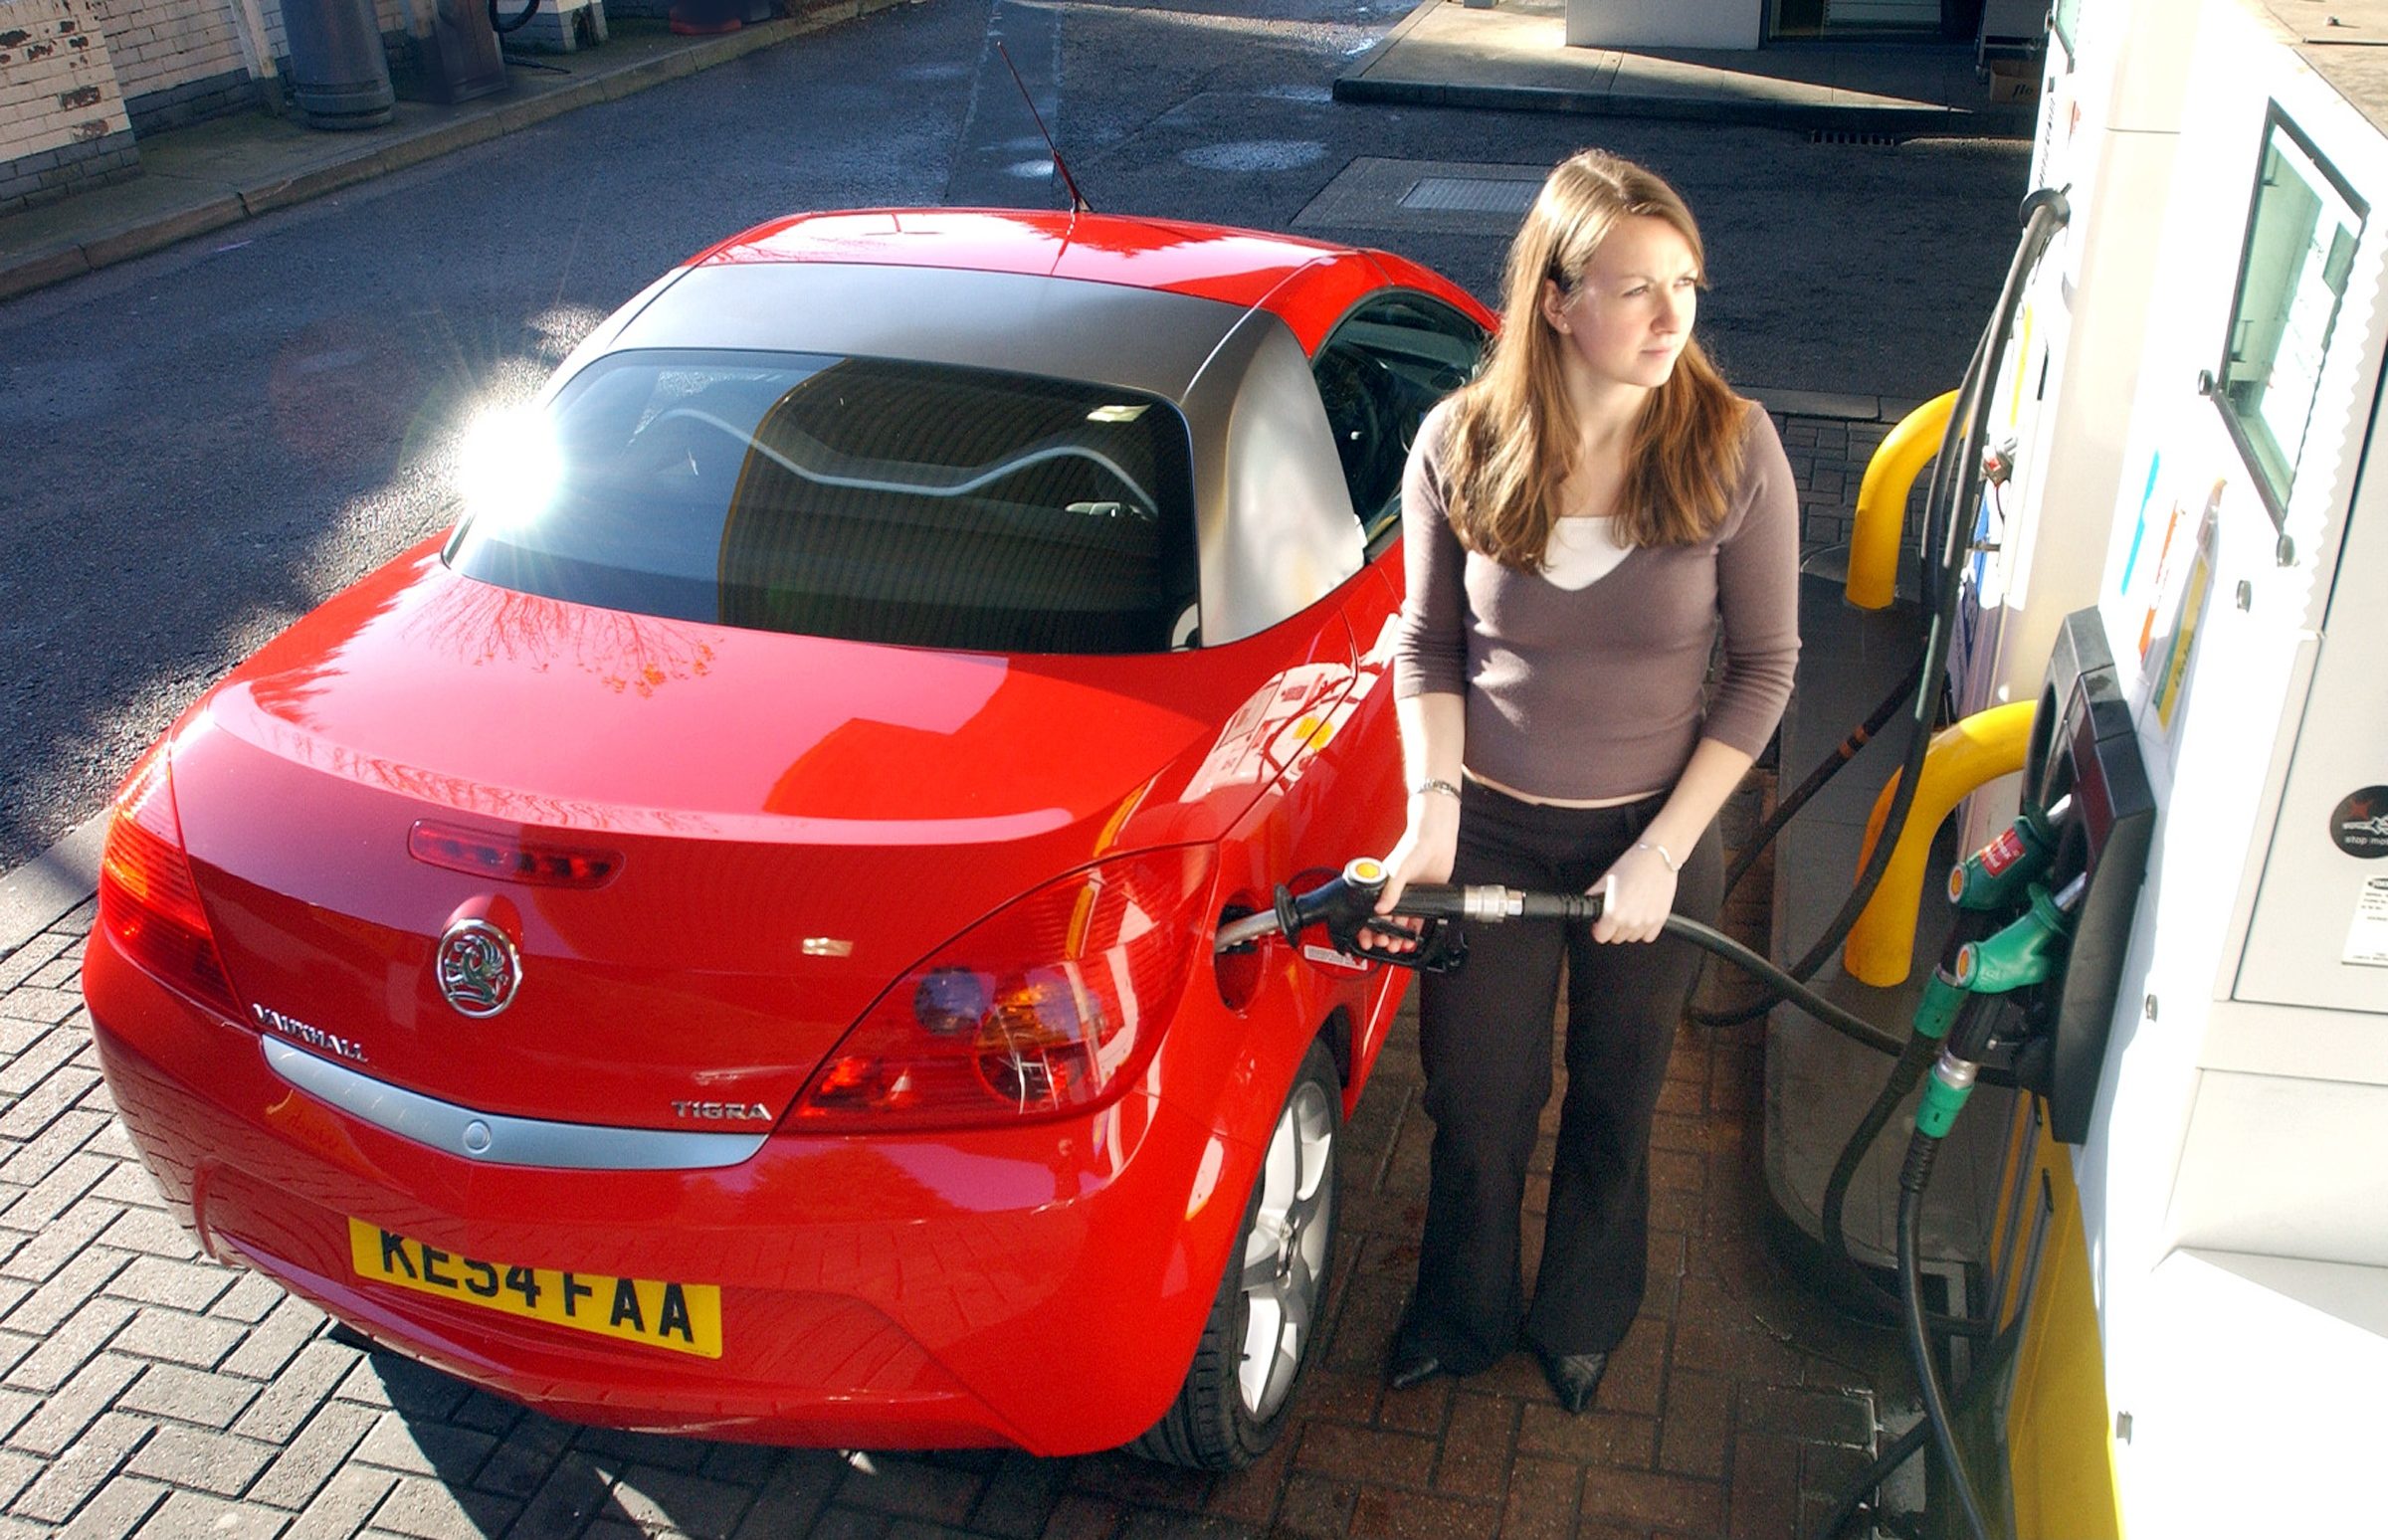 Filled your car with the wrong fuel? Here’s what to do